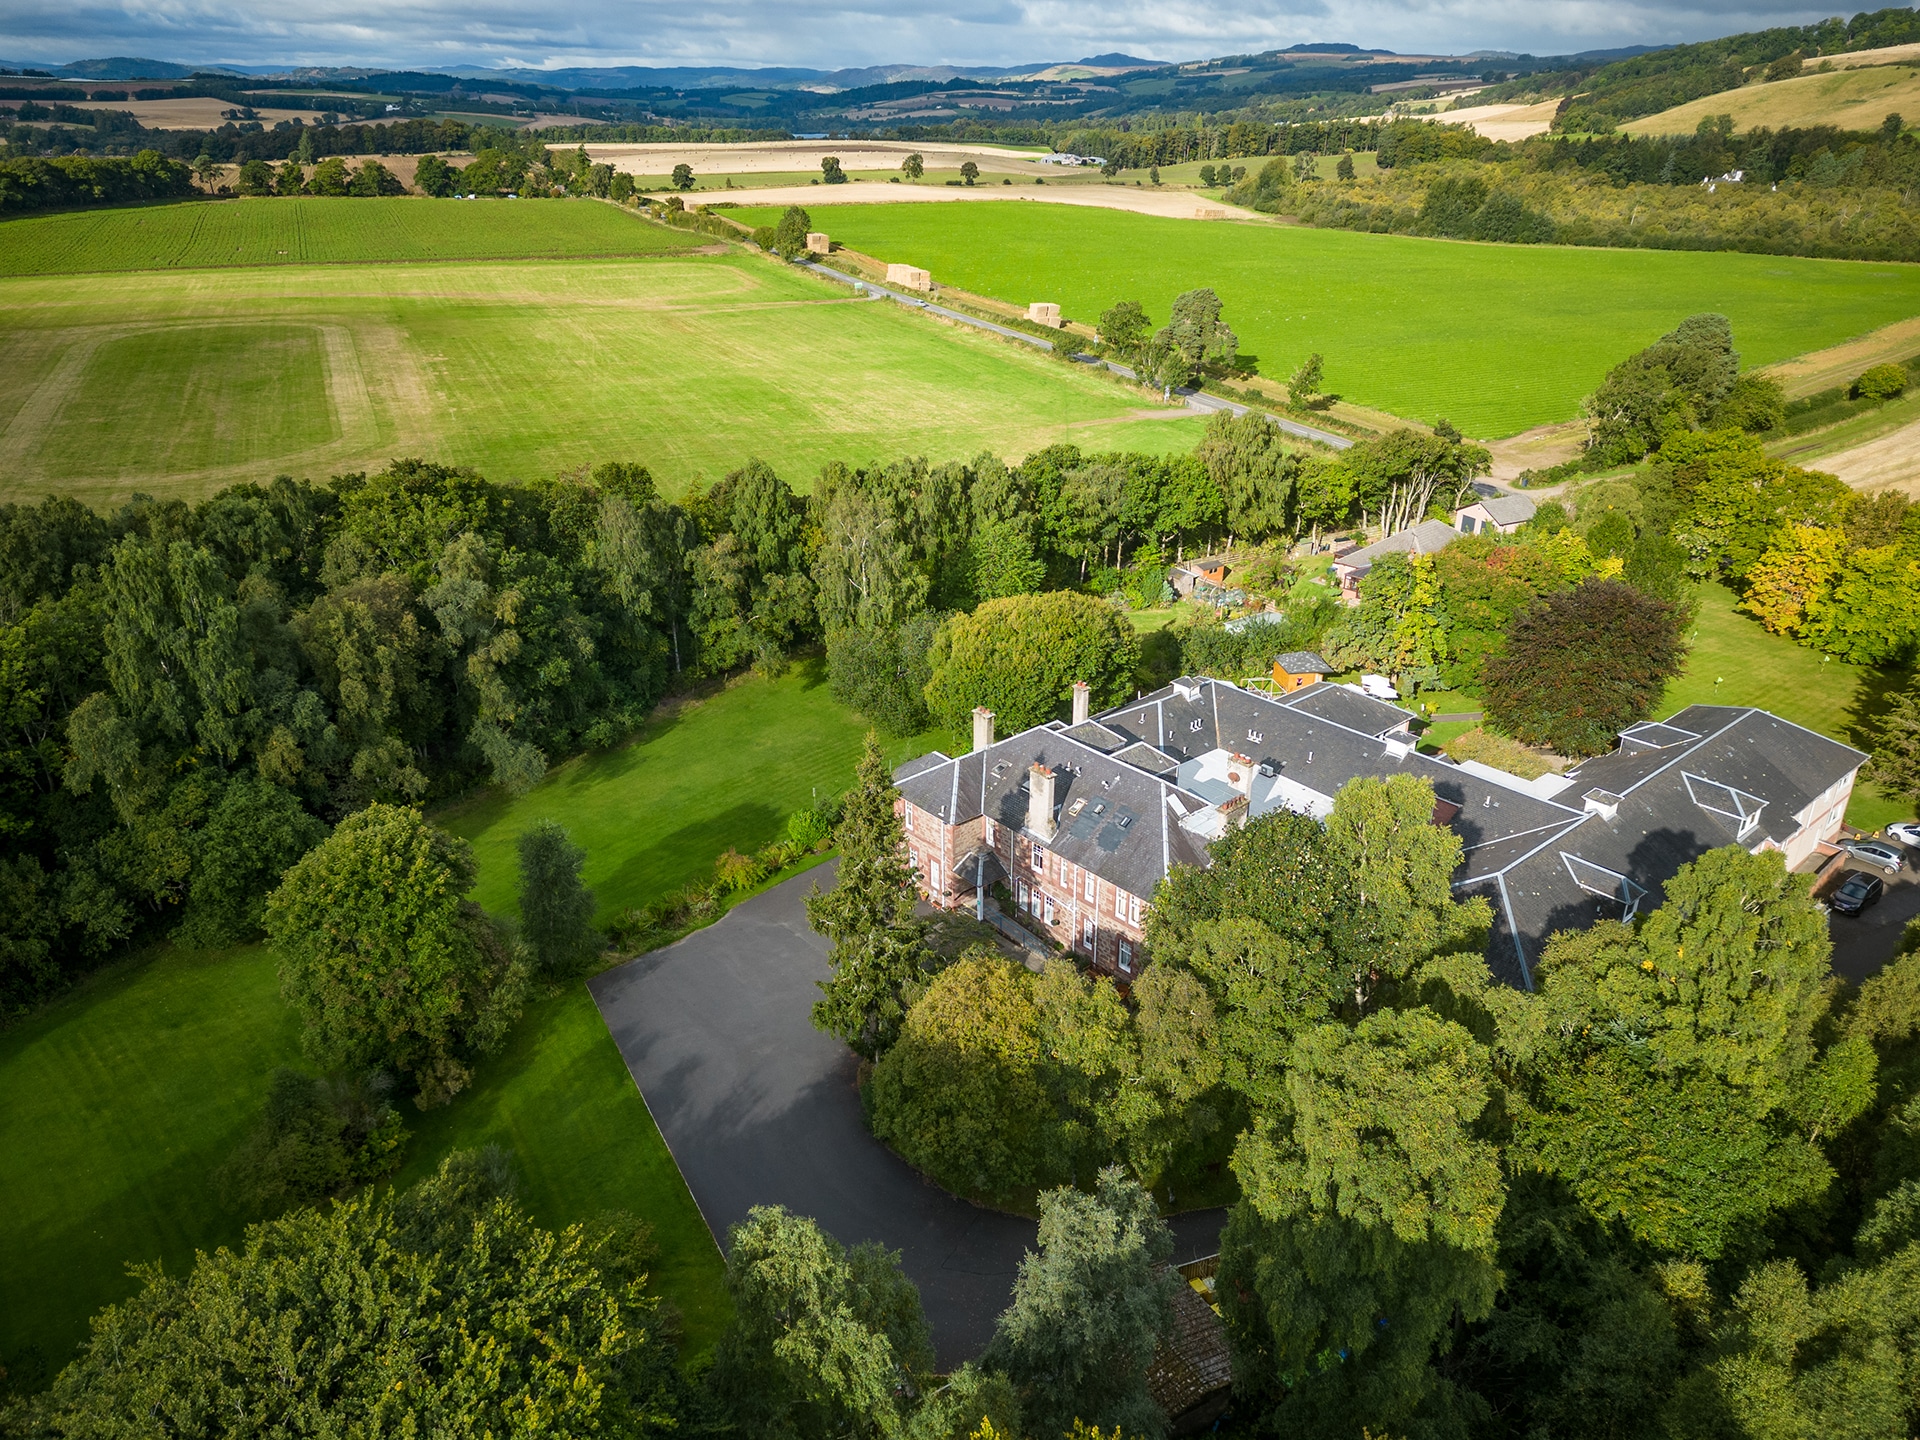 An aerial view of Muirton House Care Home and the rolling hills in the background.